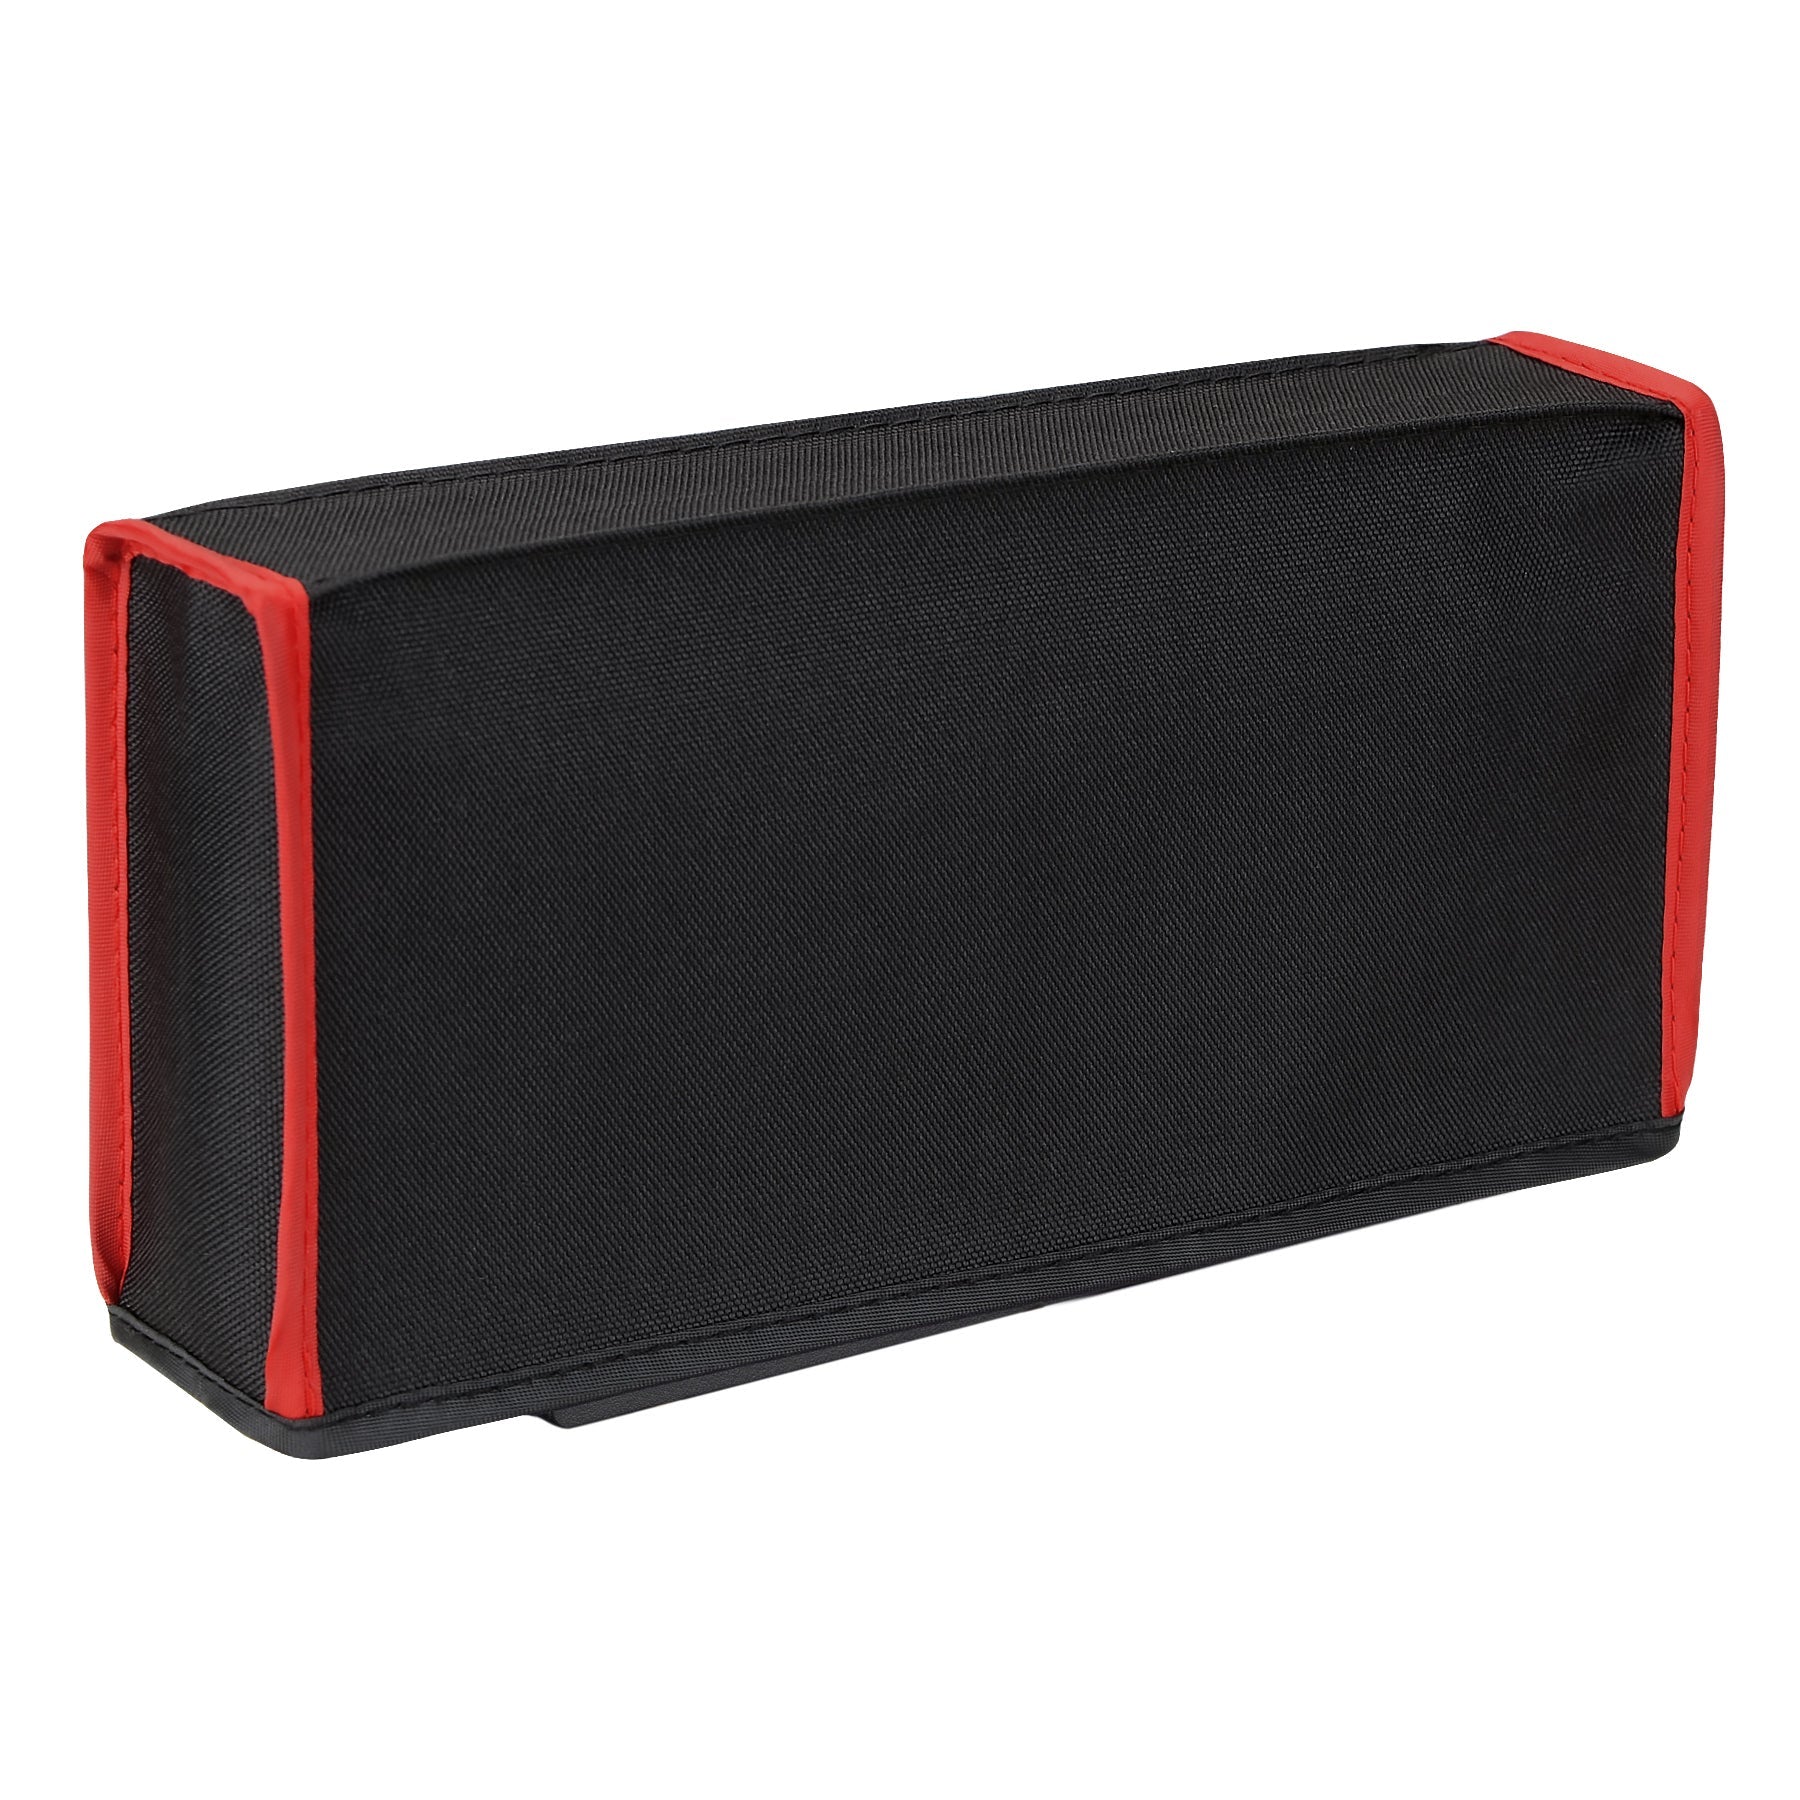 PlayVital Black & Red Trim Nylon Dust Cover, Soft Neat Lining Dust Guard, Anti Scratch Waterproof Cover Sleeve for NS & Switch OLED Charging Dock - NTA8003 PlayVital